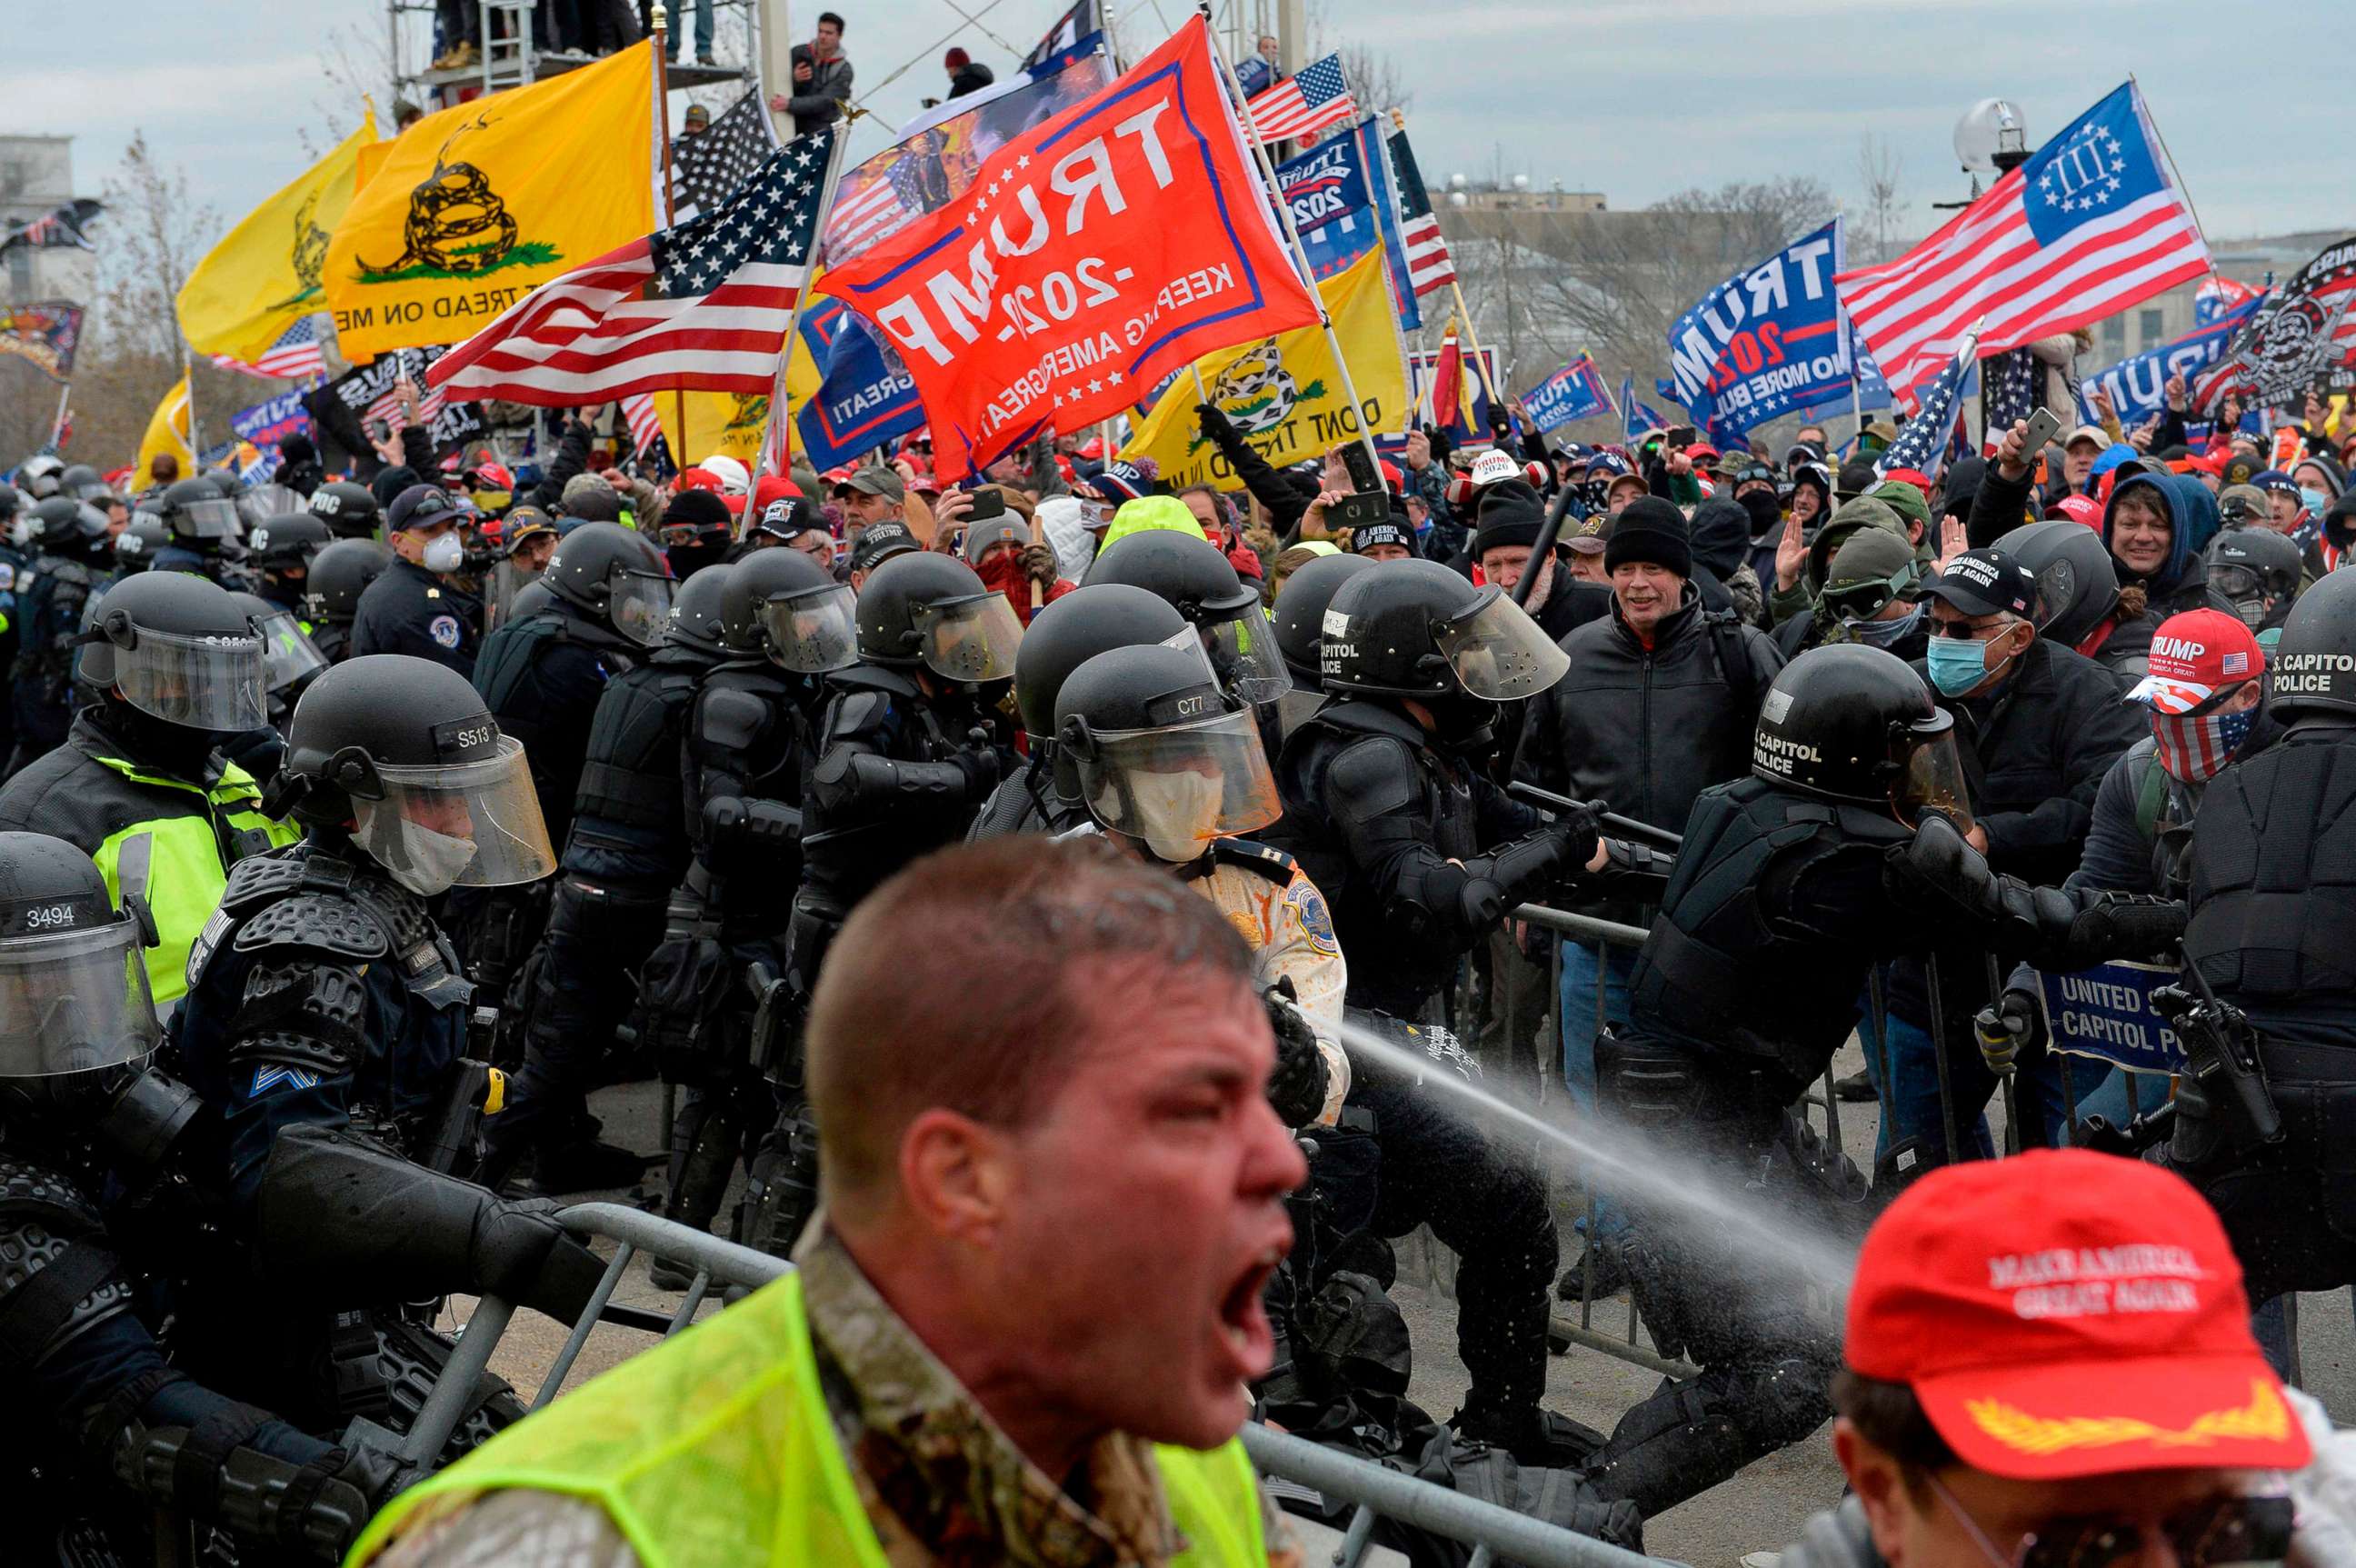 PHOTO: Trump supporters clash with police and security forces as people try to storm the Capital Building in Washington D.C on Jan. 6, 2021. Demonstrators breeched security and entered the Capitol as Congress debated Electoral Vote Certification. 